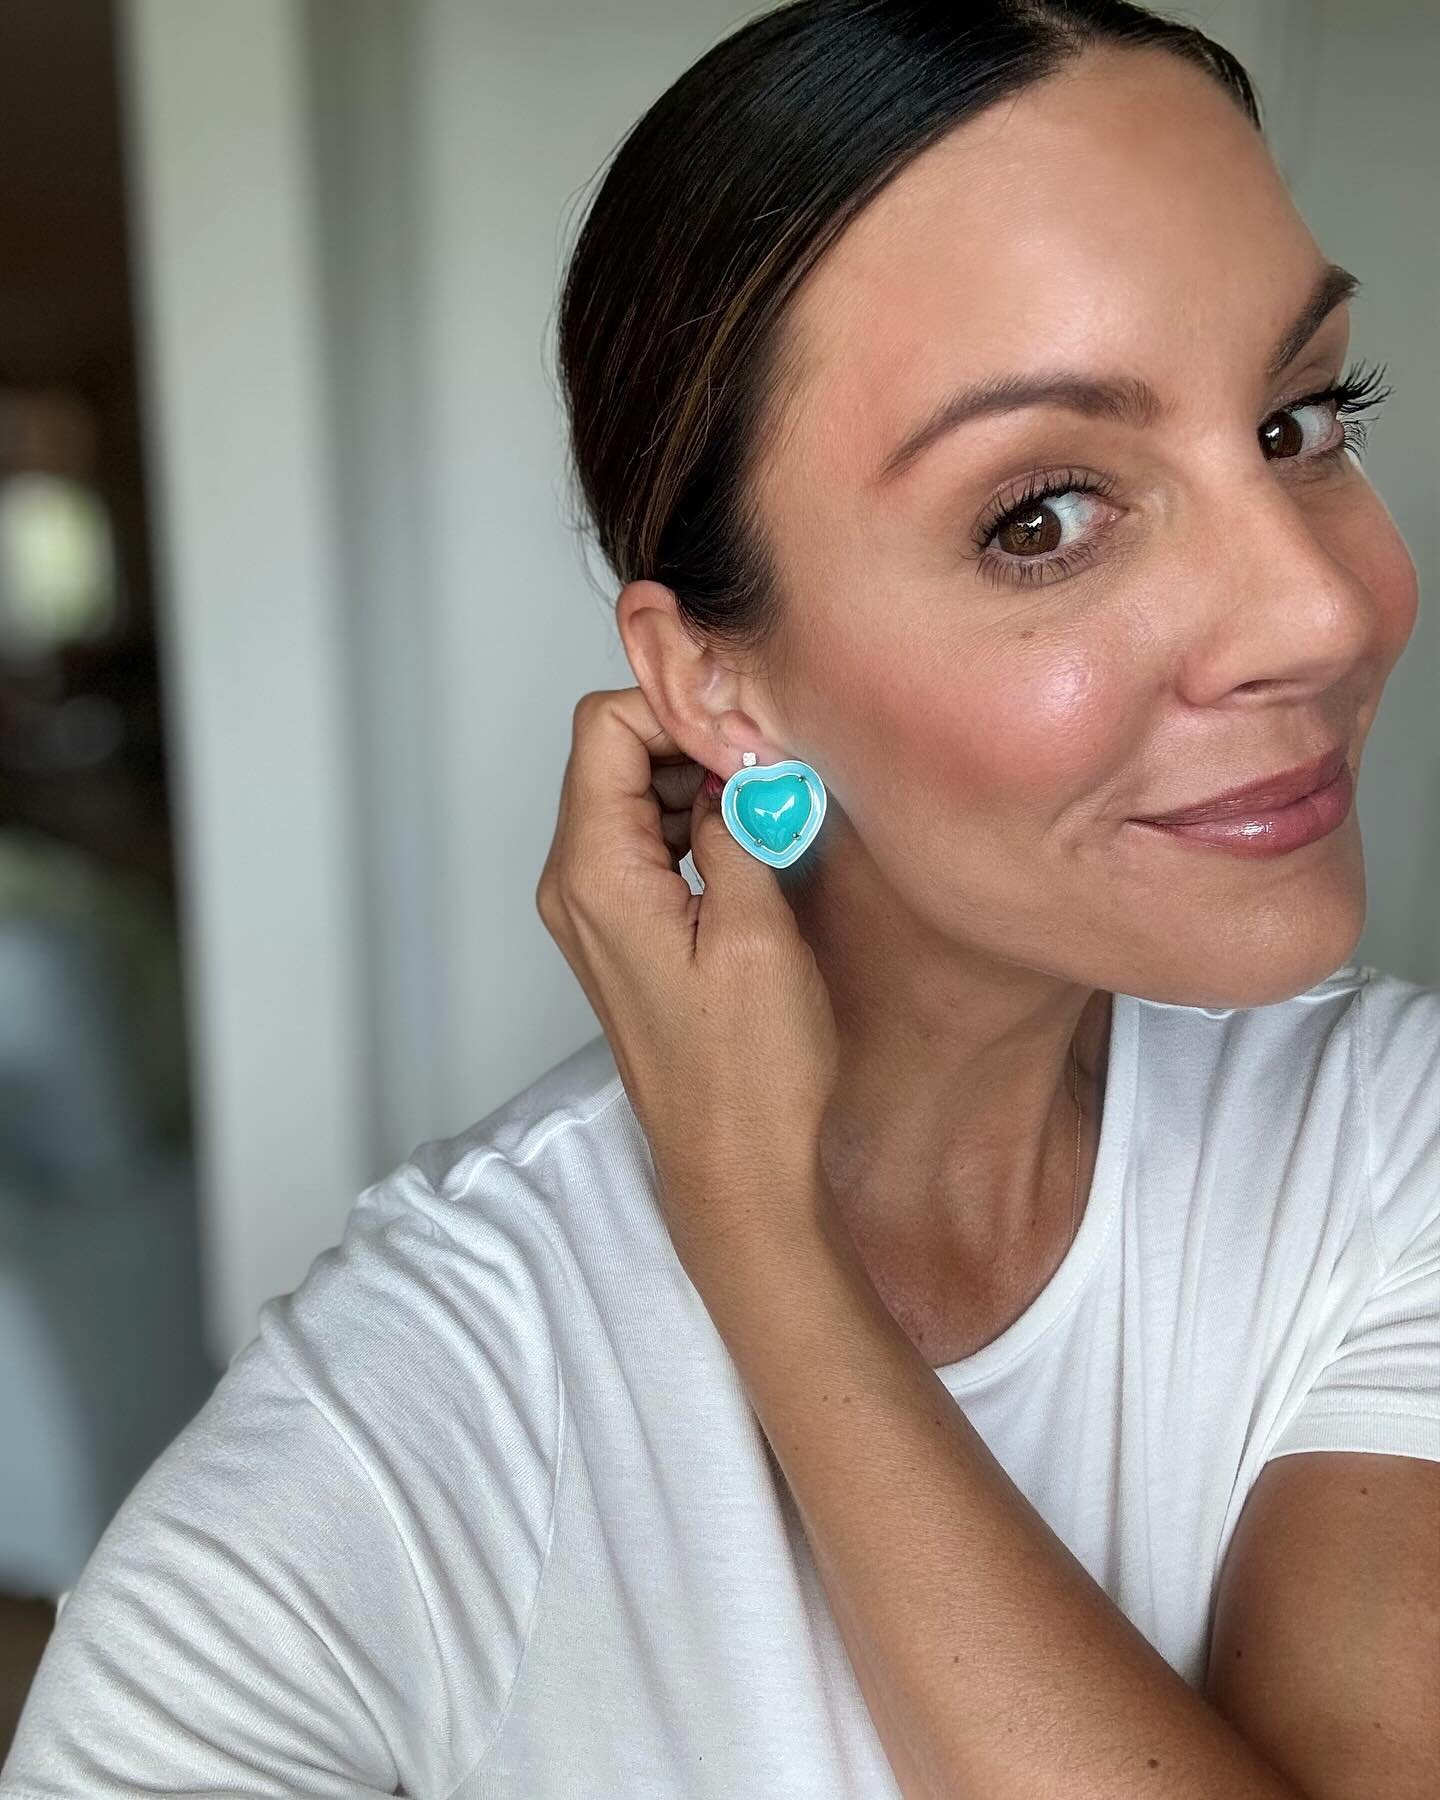 Meet my new summer MVPs! 🩵 These heart studs and jelly hoops from @alisonlou are the perfect pop for all my summer outfits. And the best part is they&rsquo;re all 60% off right now! Head to my stories and my LTK page to shop before these prices are 